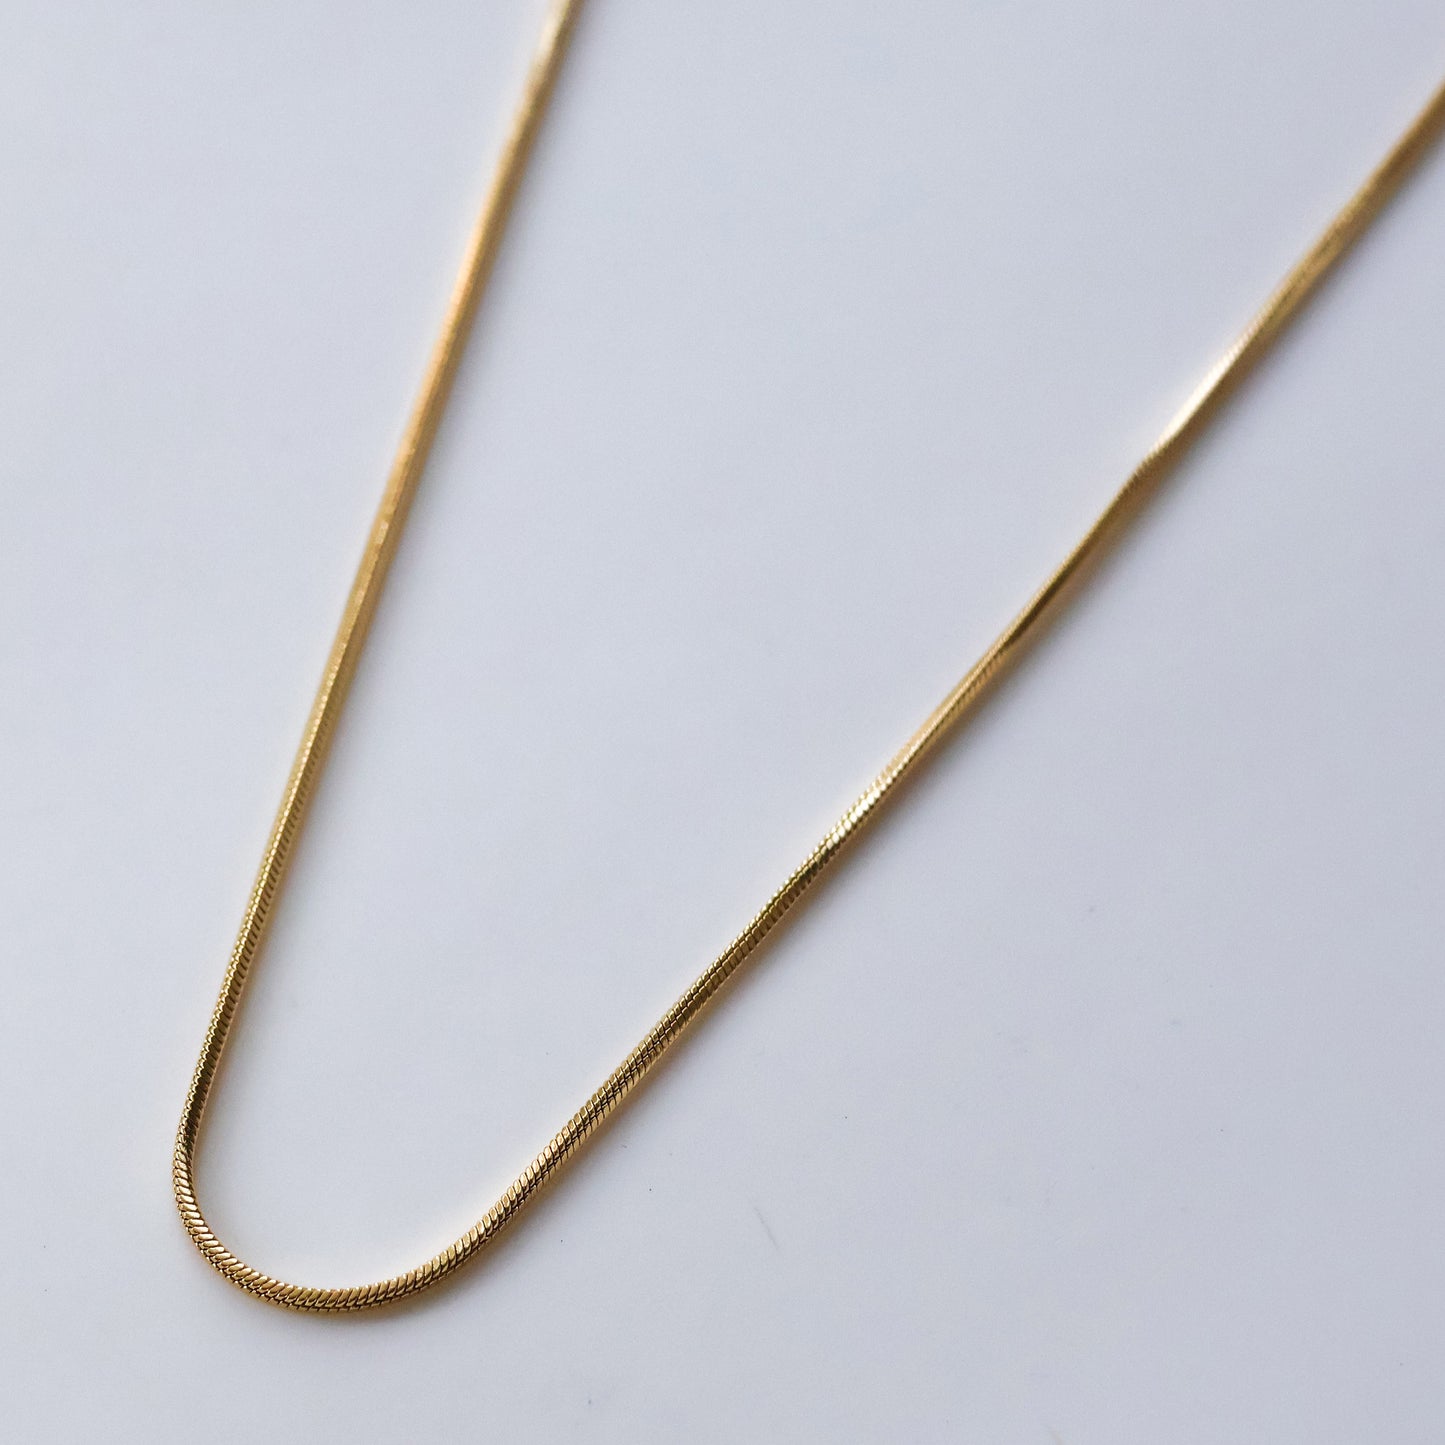 Plain necklace chains gold plated tarnish proof